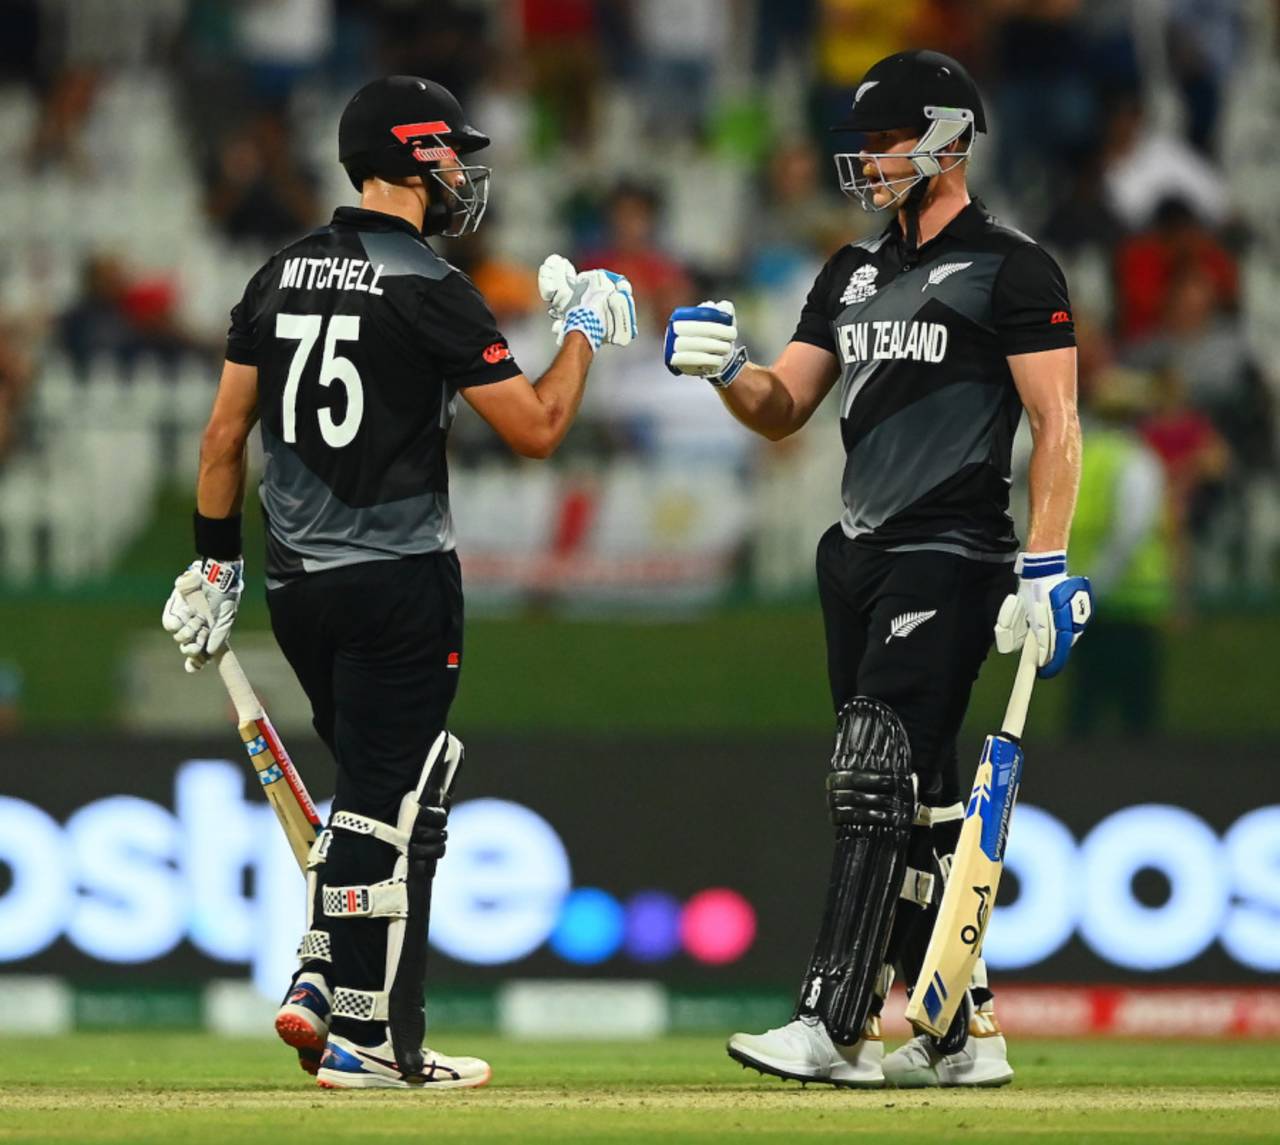 New Zealand made 57 in the death overs against England last week, and they did it with an over to spare&nbsp;&nbsp;&bull;&nbsp;&nbsp;Getty Images